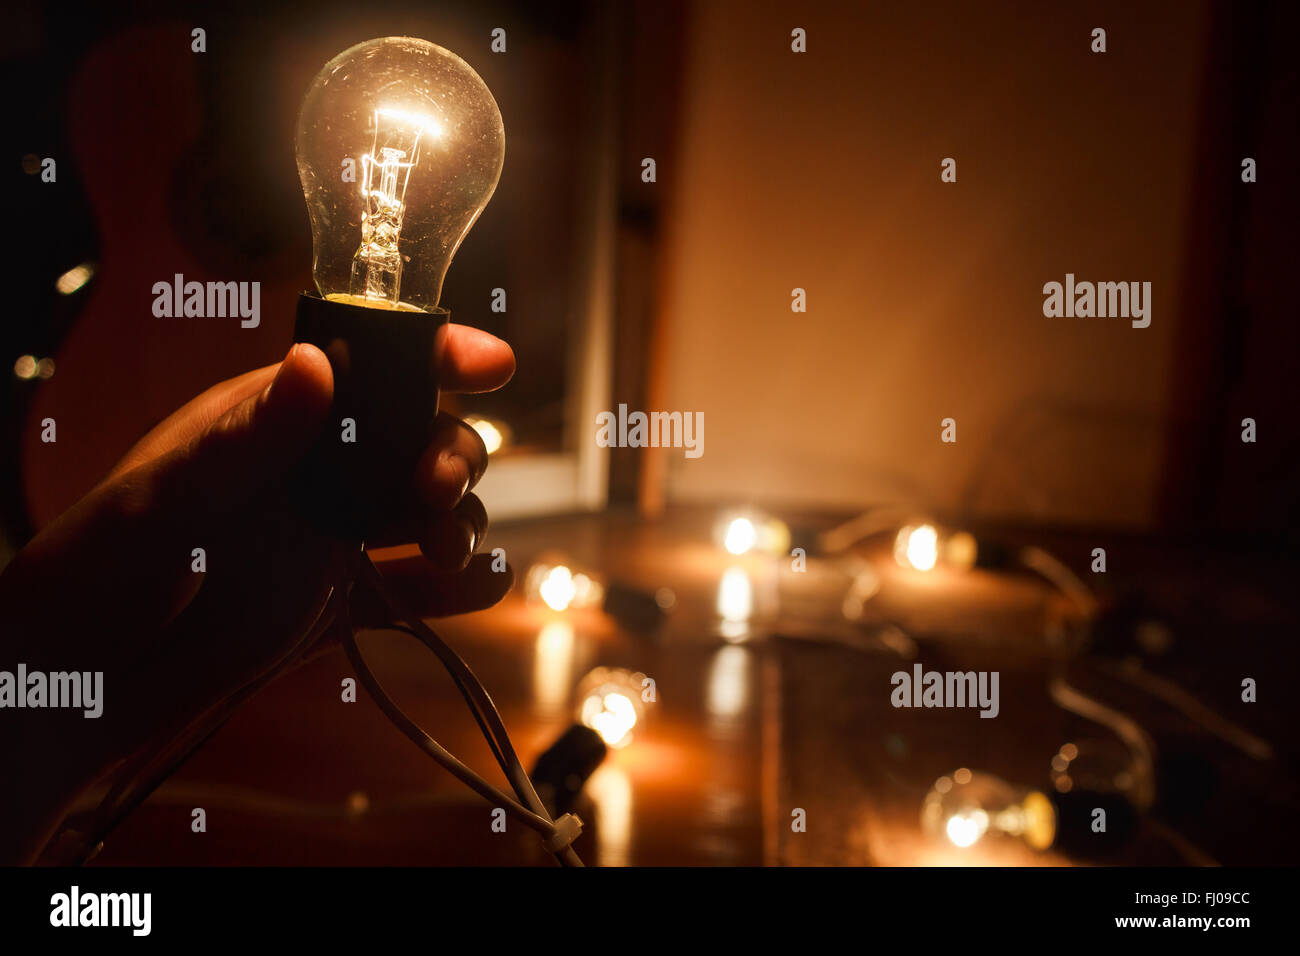 Incandescent light bulb, warm turned on. Garland of tungsten lamps. Light in darkness, copy space. Stock Photo